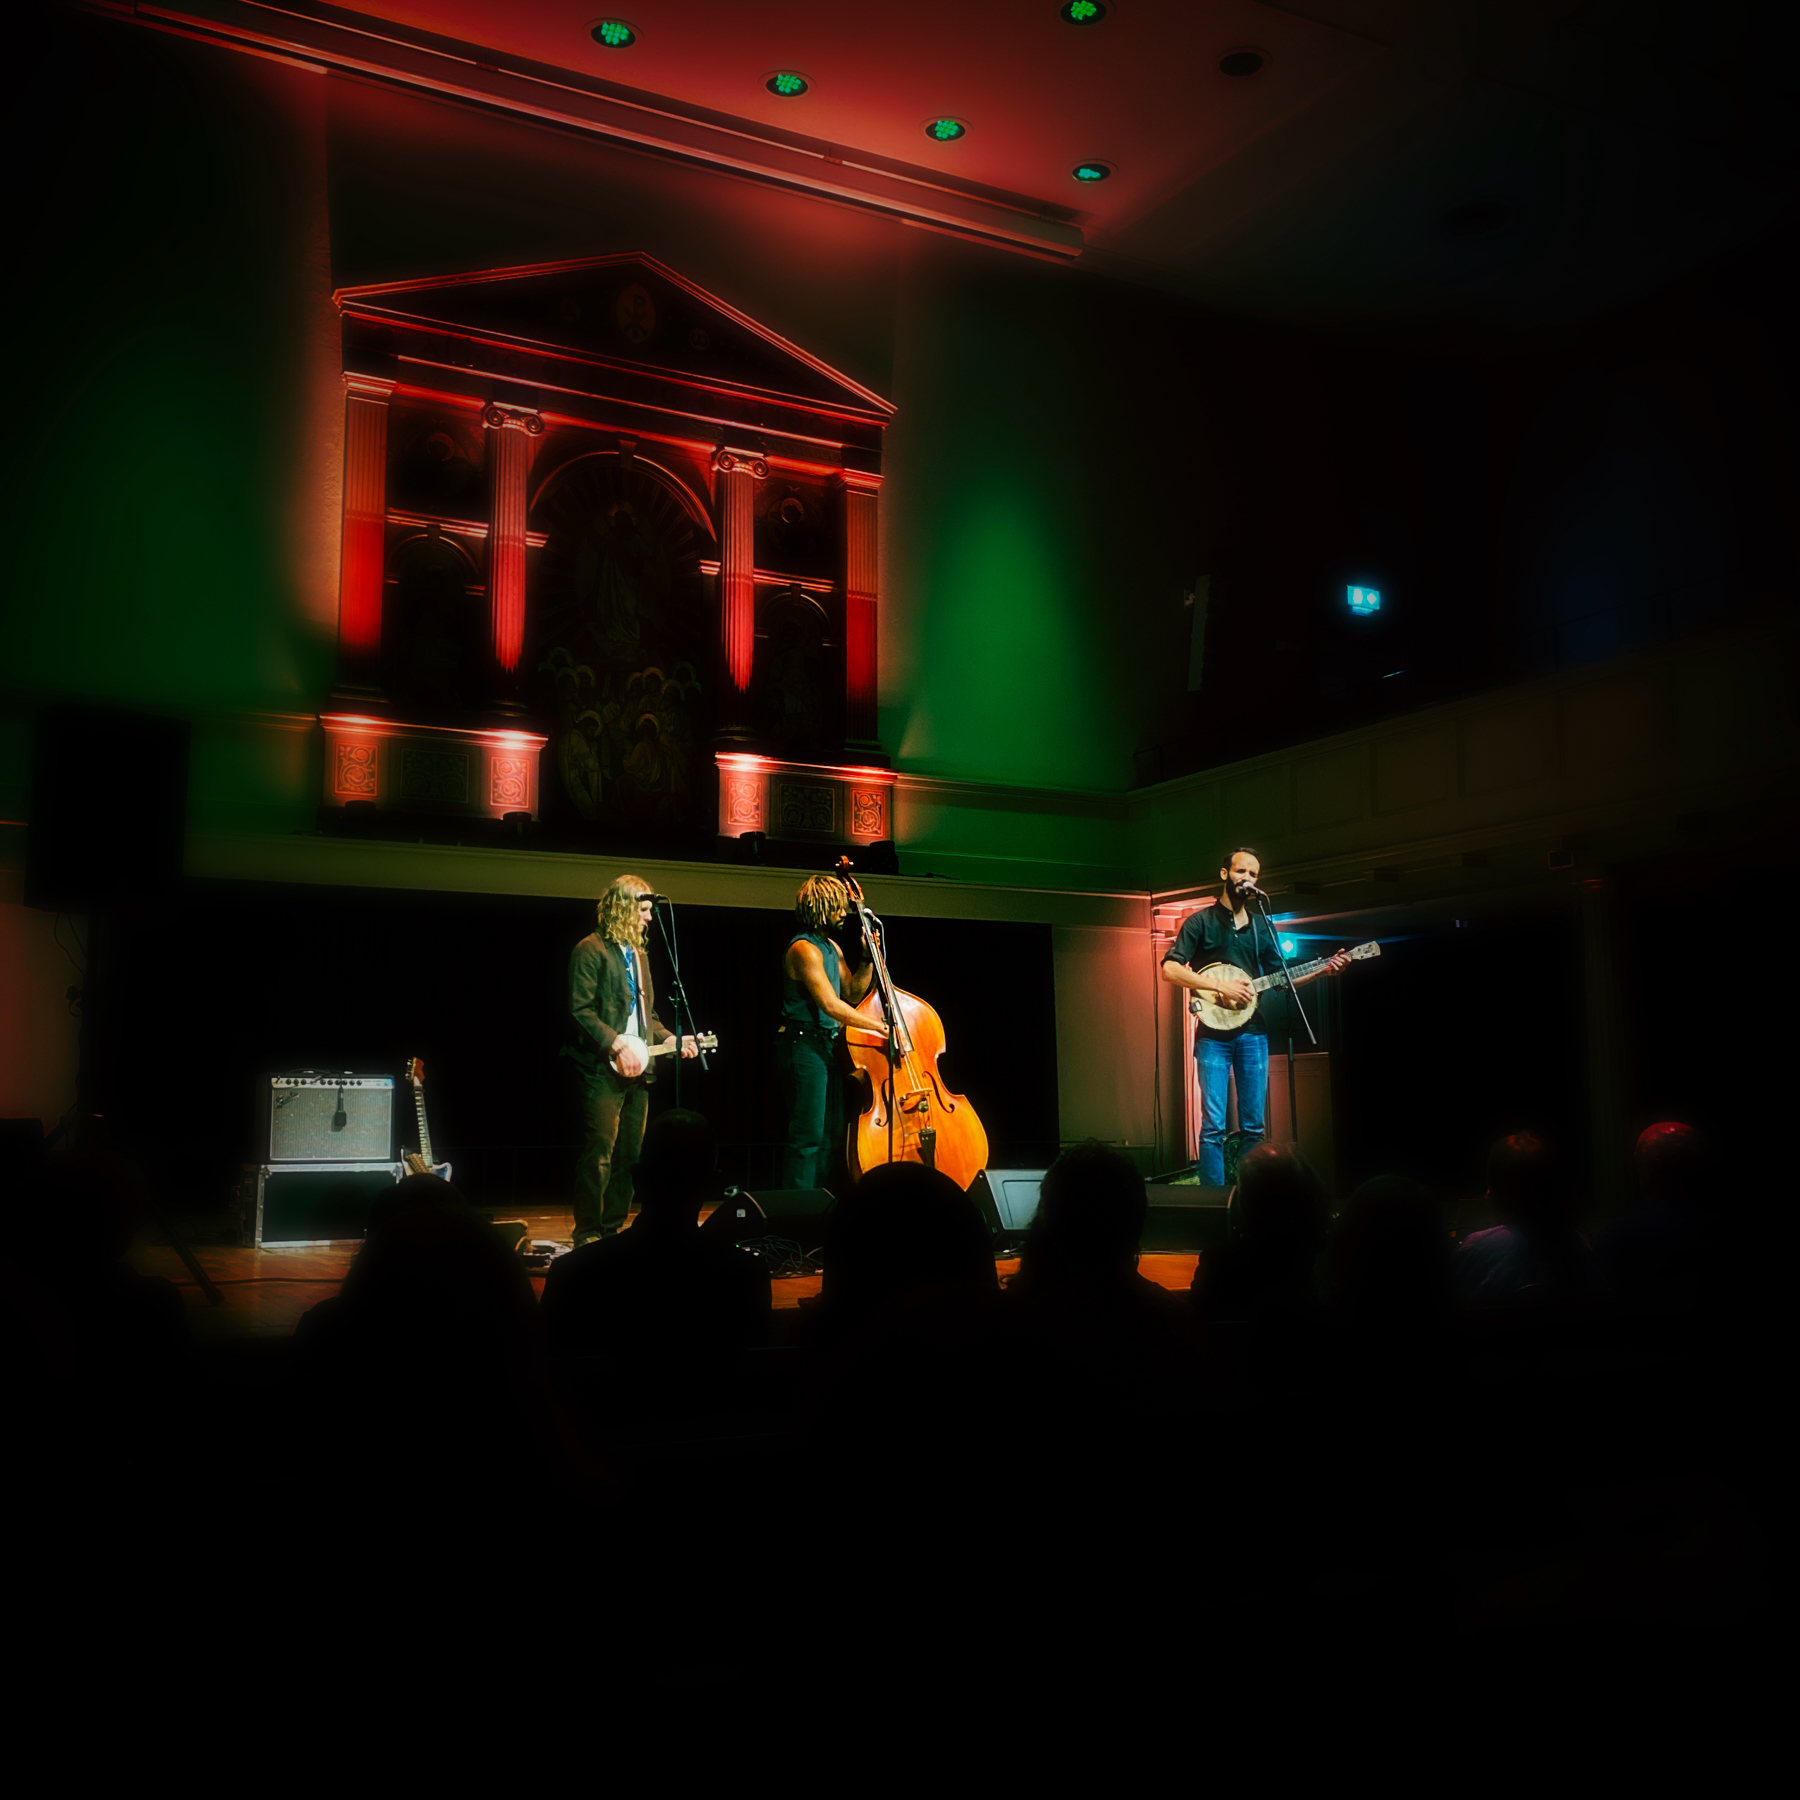 A musical trio performing on stage in a dimly-lit venue with colorful lighting. The three musicians are playing different instruments, including a banjo and a double bass, with a backdrop featuring architectural elements lit in red and green.